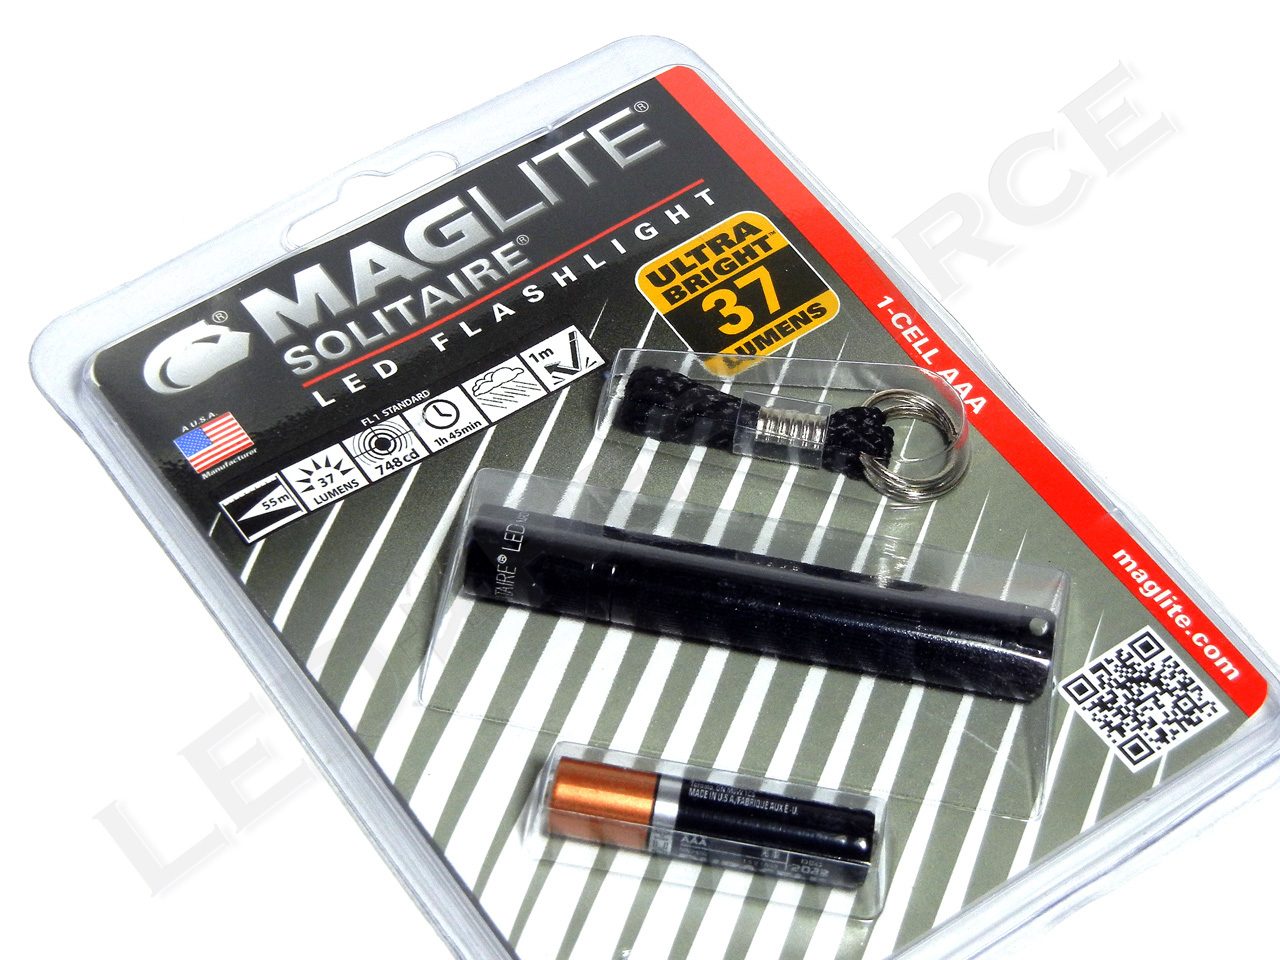 Maglite Solitaire LED Flashlight Review -